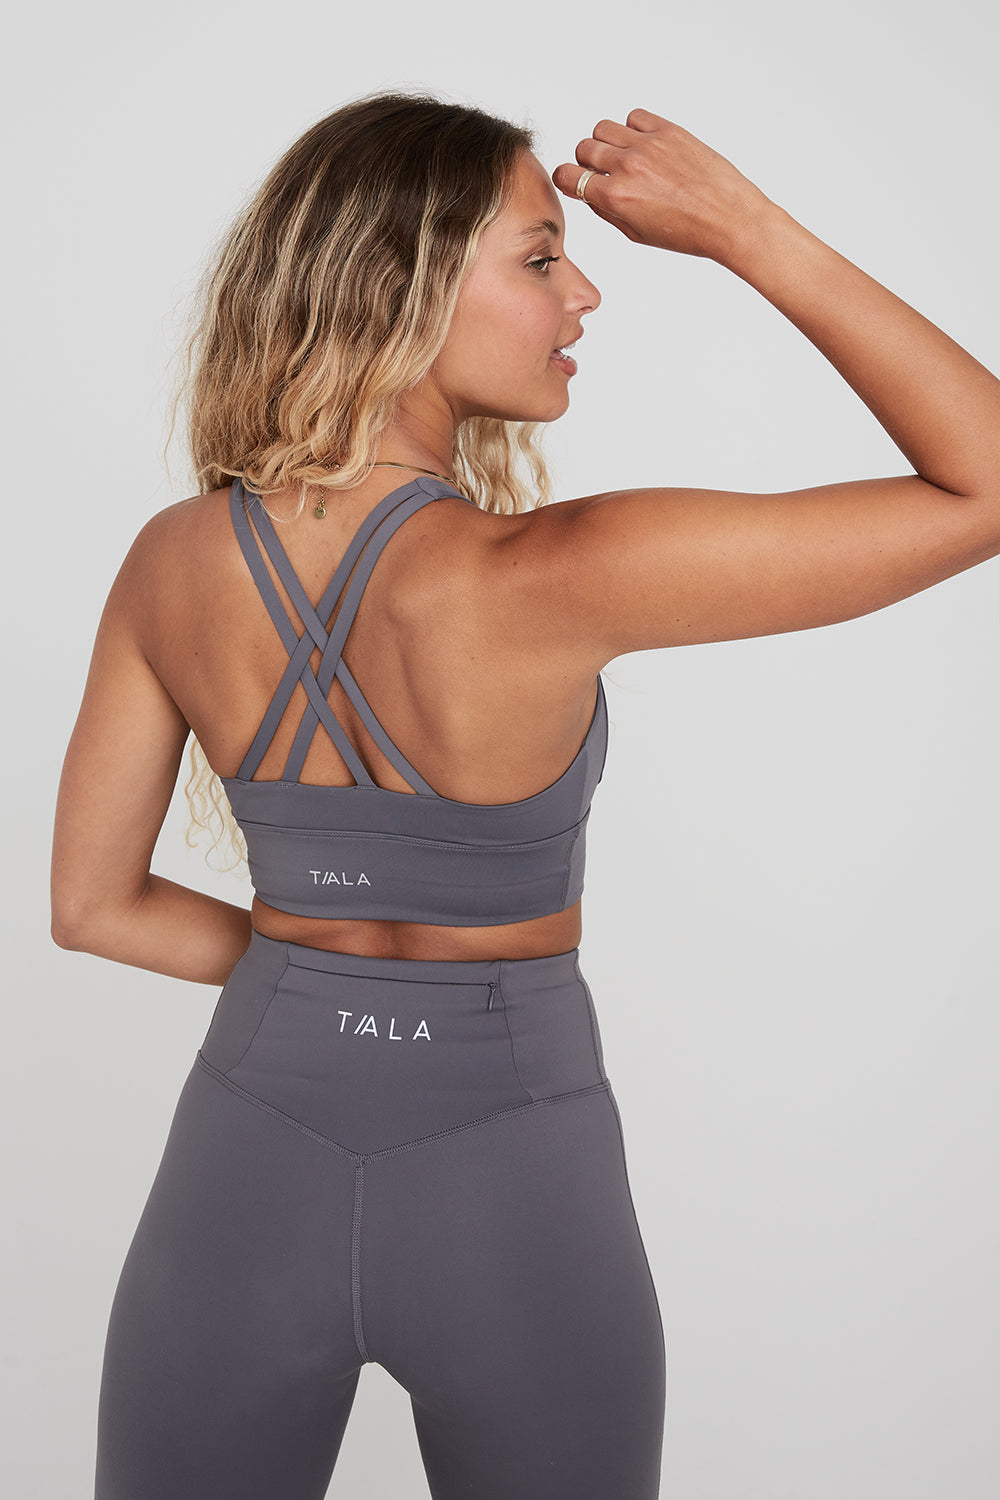 TALA Skinluxe light support sports bra in sage green exclusive to ASOS with  matc